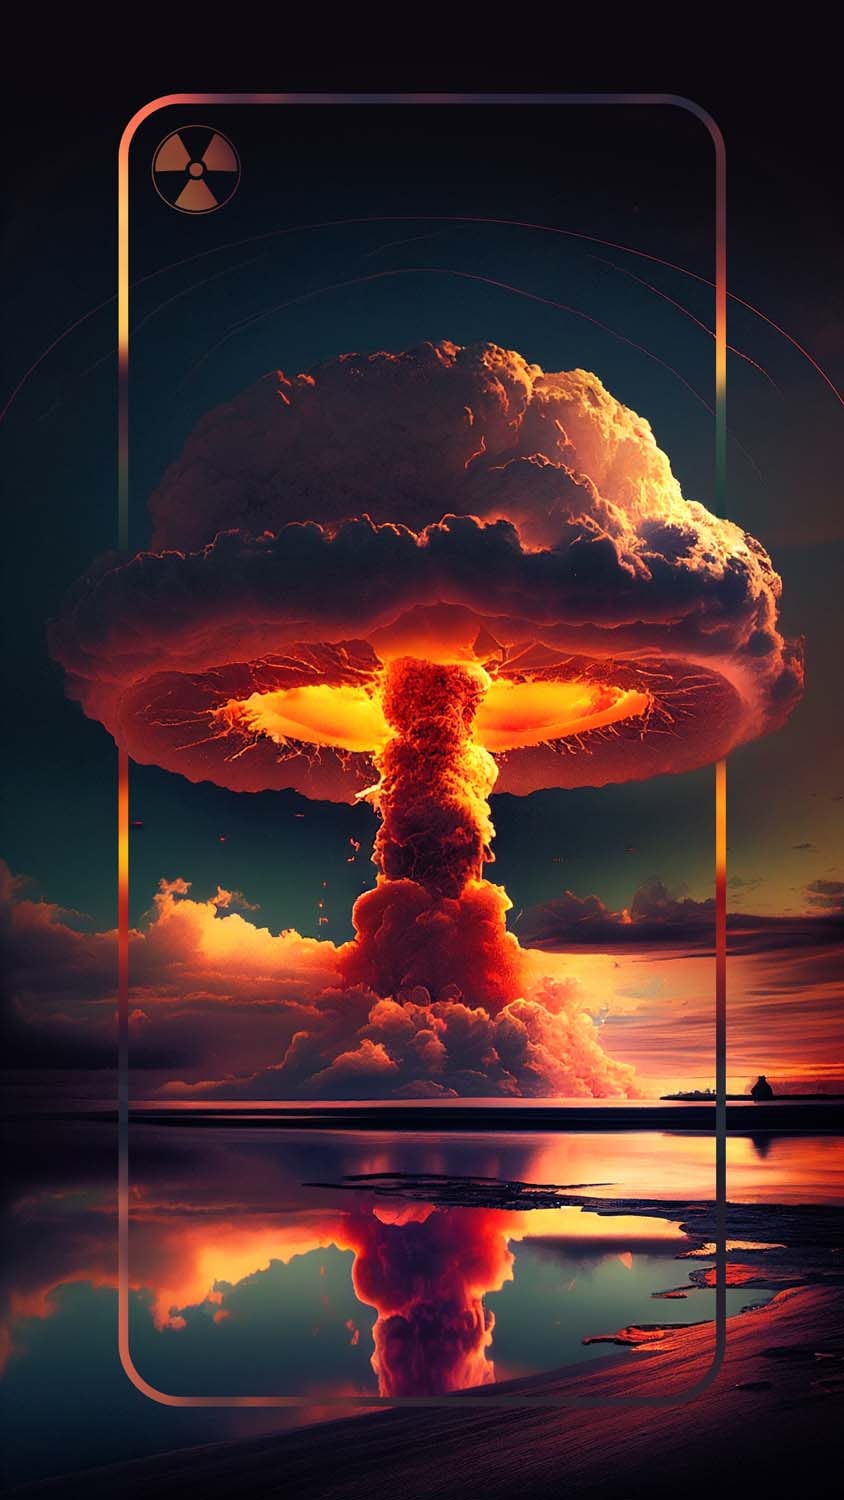 2600 Nuclear Explosion Stock Photos Pictures  RoyaltyFree Images   iStock  Atomic bomb Nuclear bomb Explosion